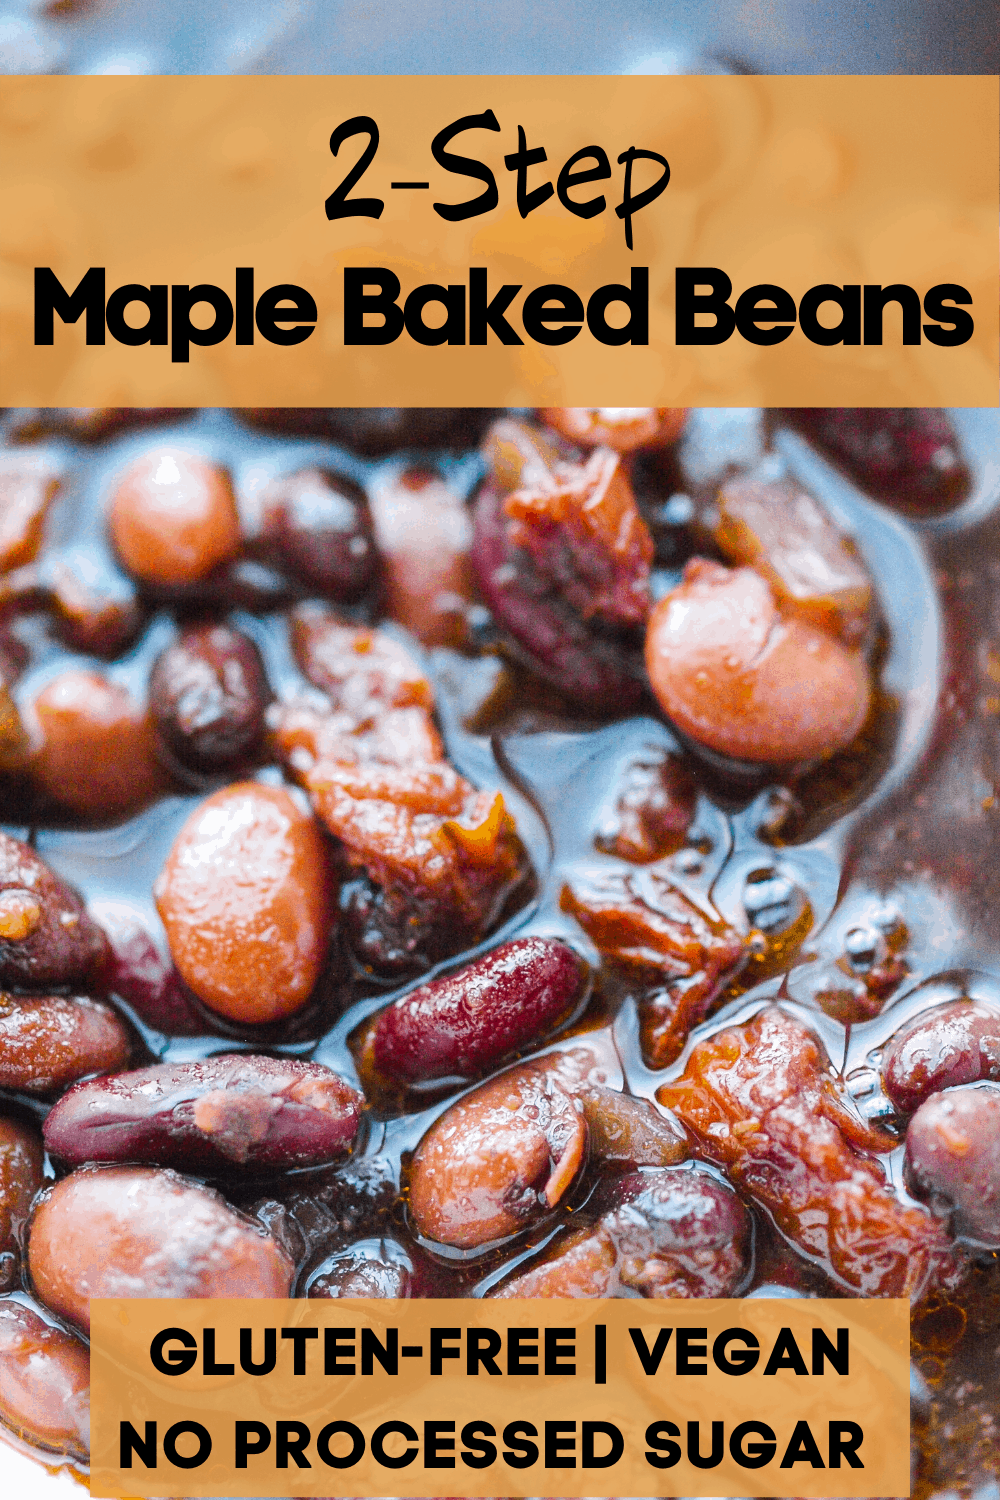 A pinterest pin for maple maple beans. The image has an overhead up-close of baked beans